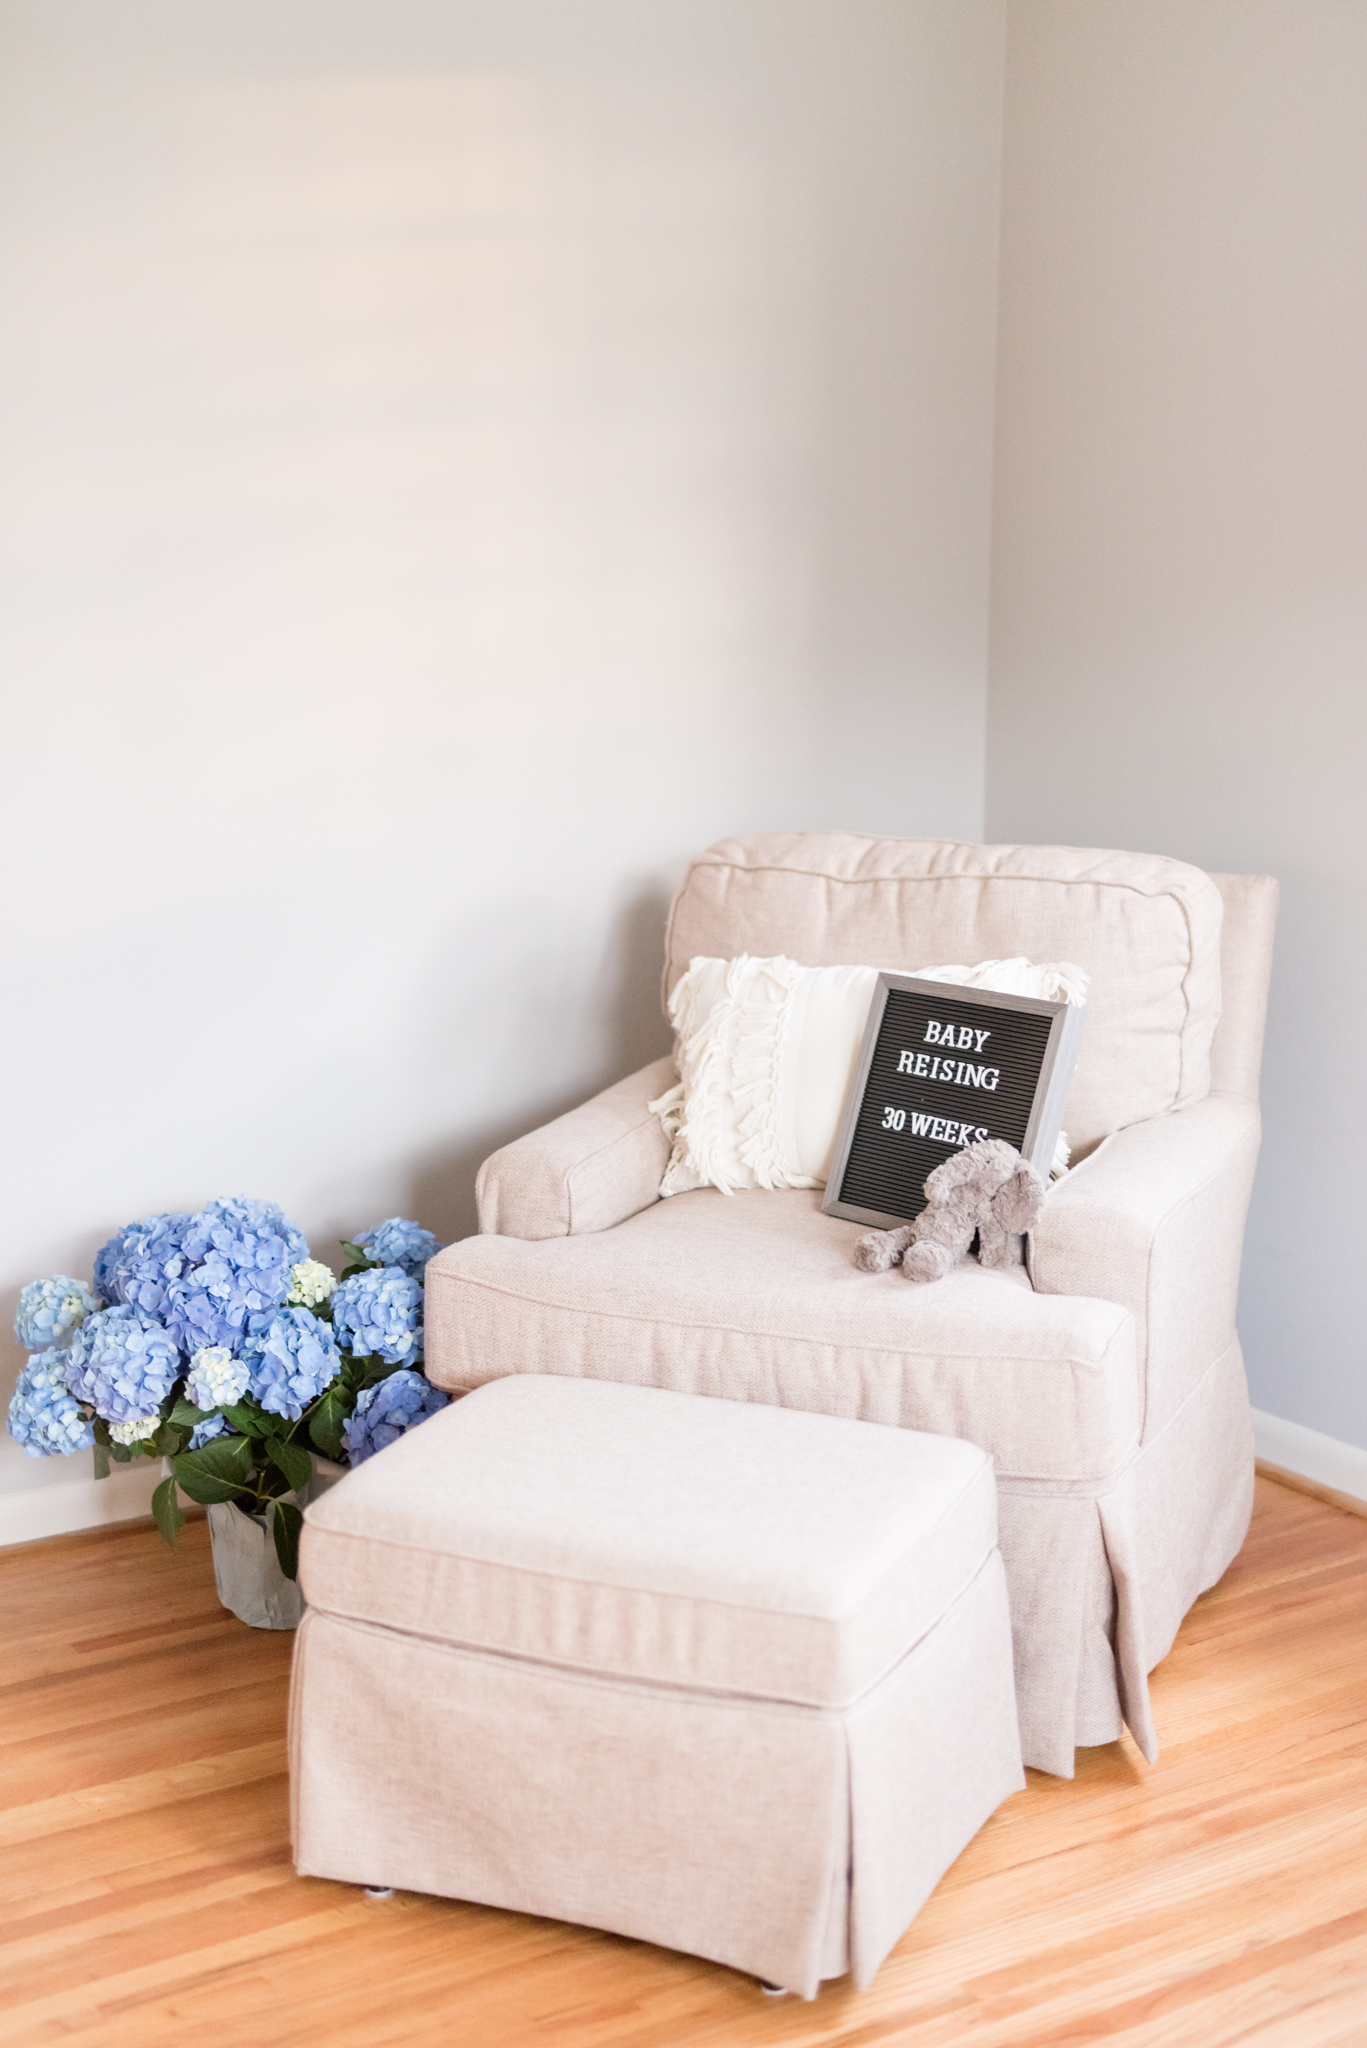 Rocking chair and baby sign.